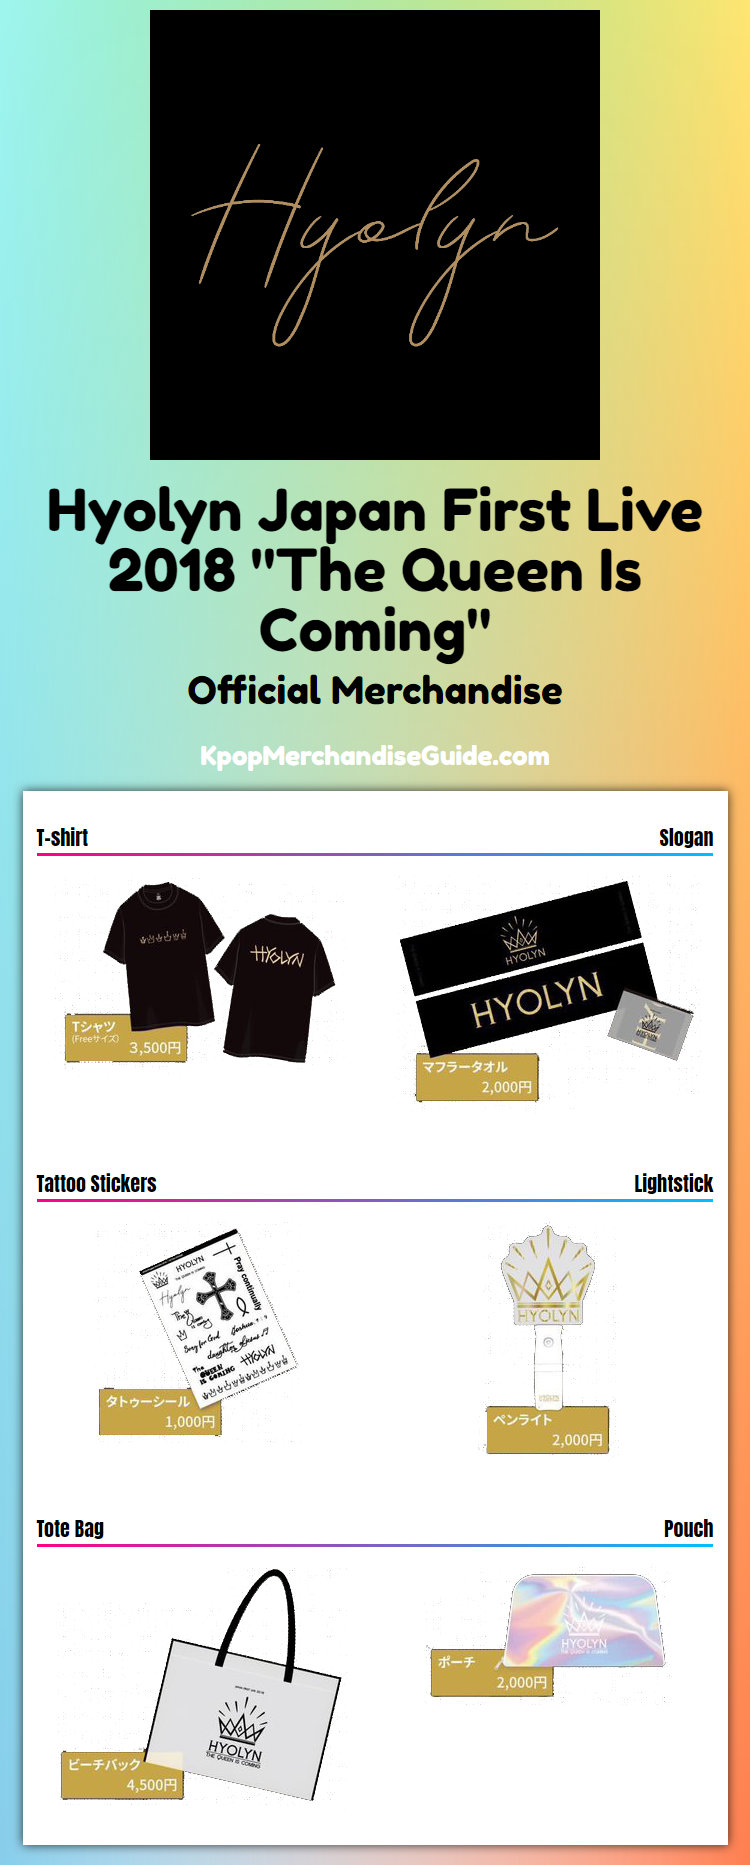 Hyolyn Japan First Live 2018 The Queen Is Coming Merchandise